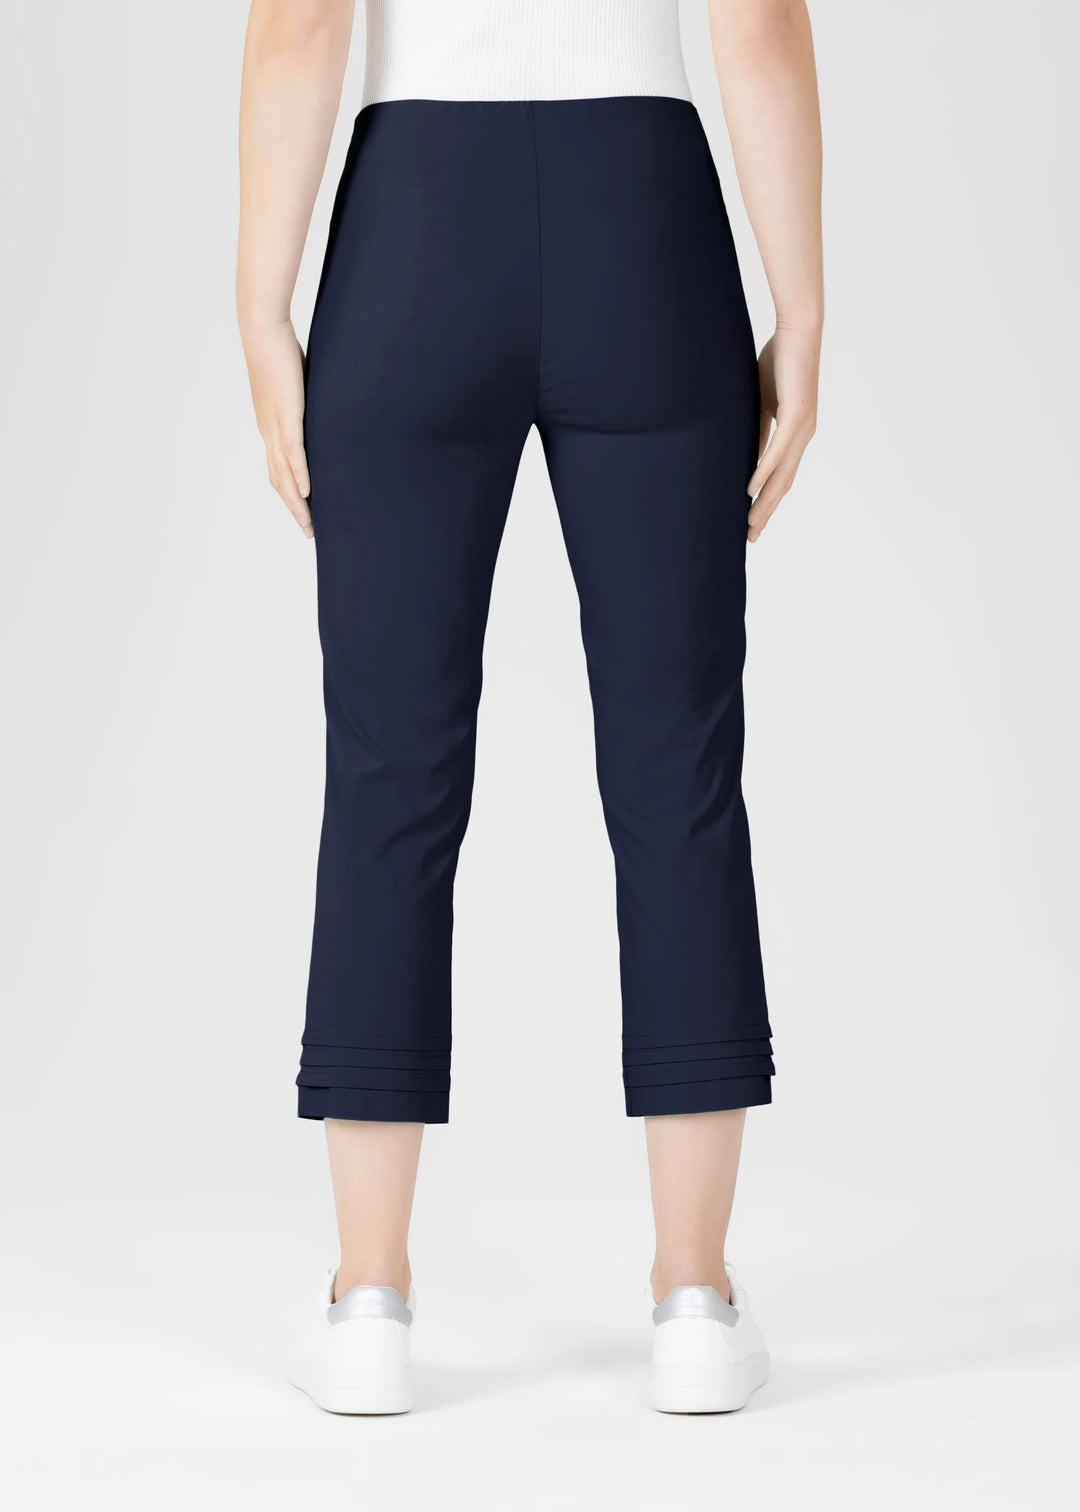 Stehmann Ina Summer Bengaline Trousers In Navy